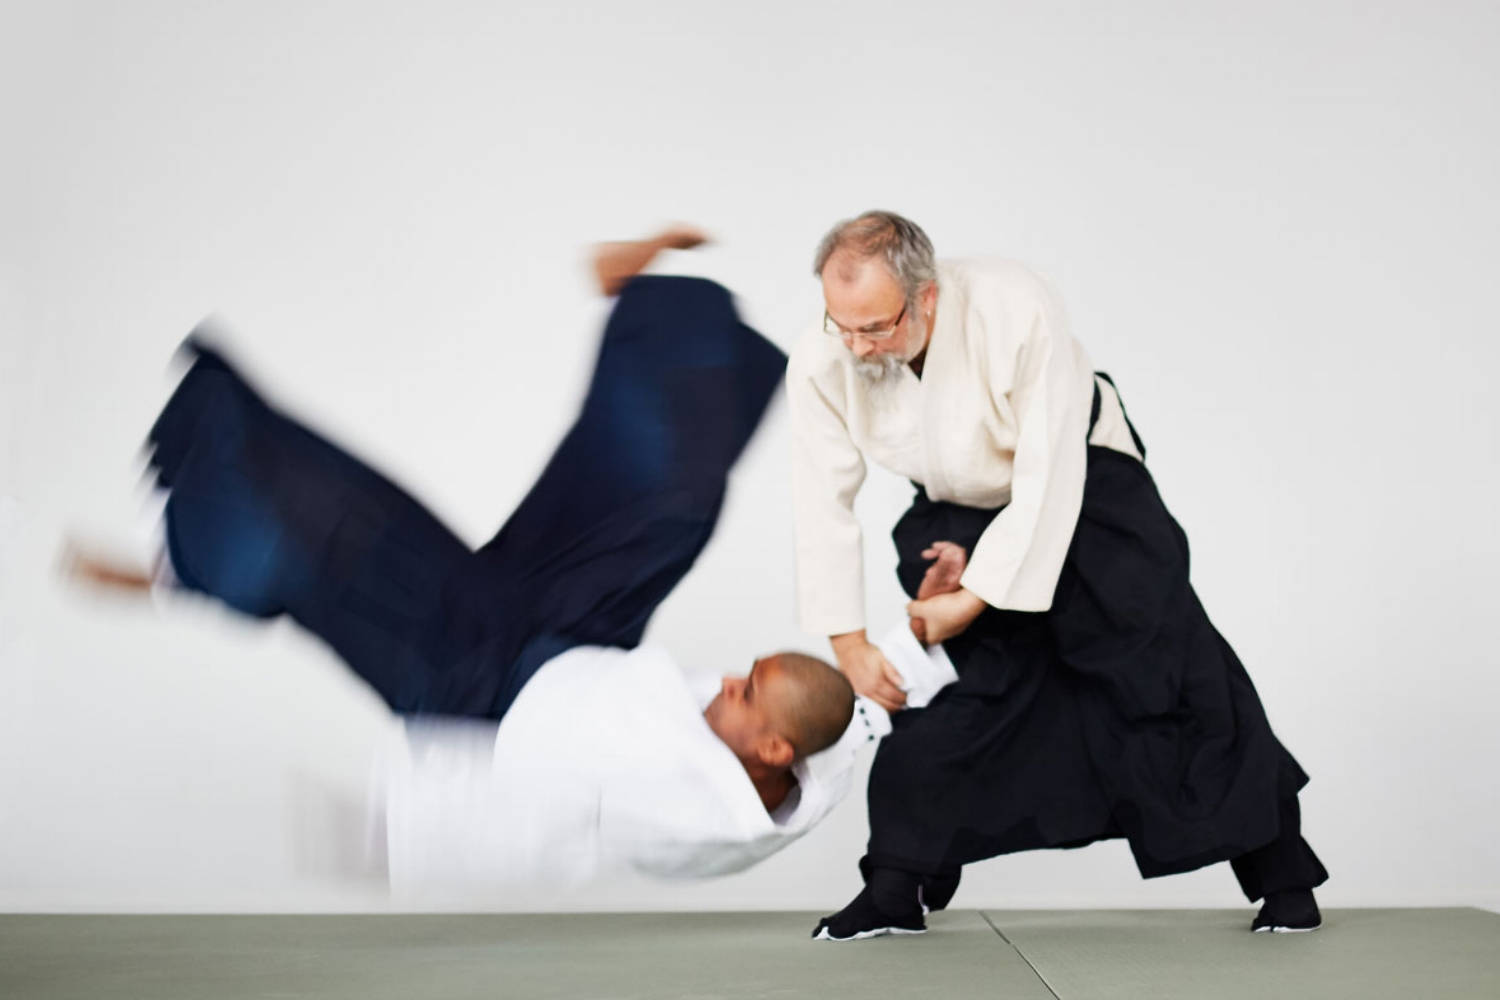 Mid Action Koshi Nage Aikido Technique Wallpaper